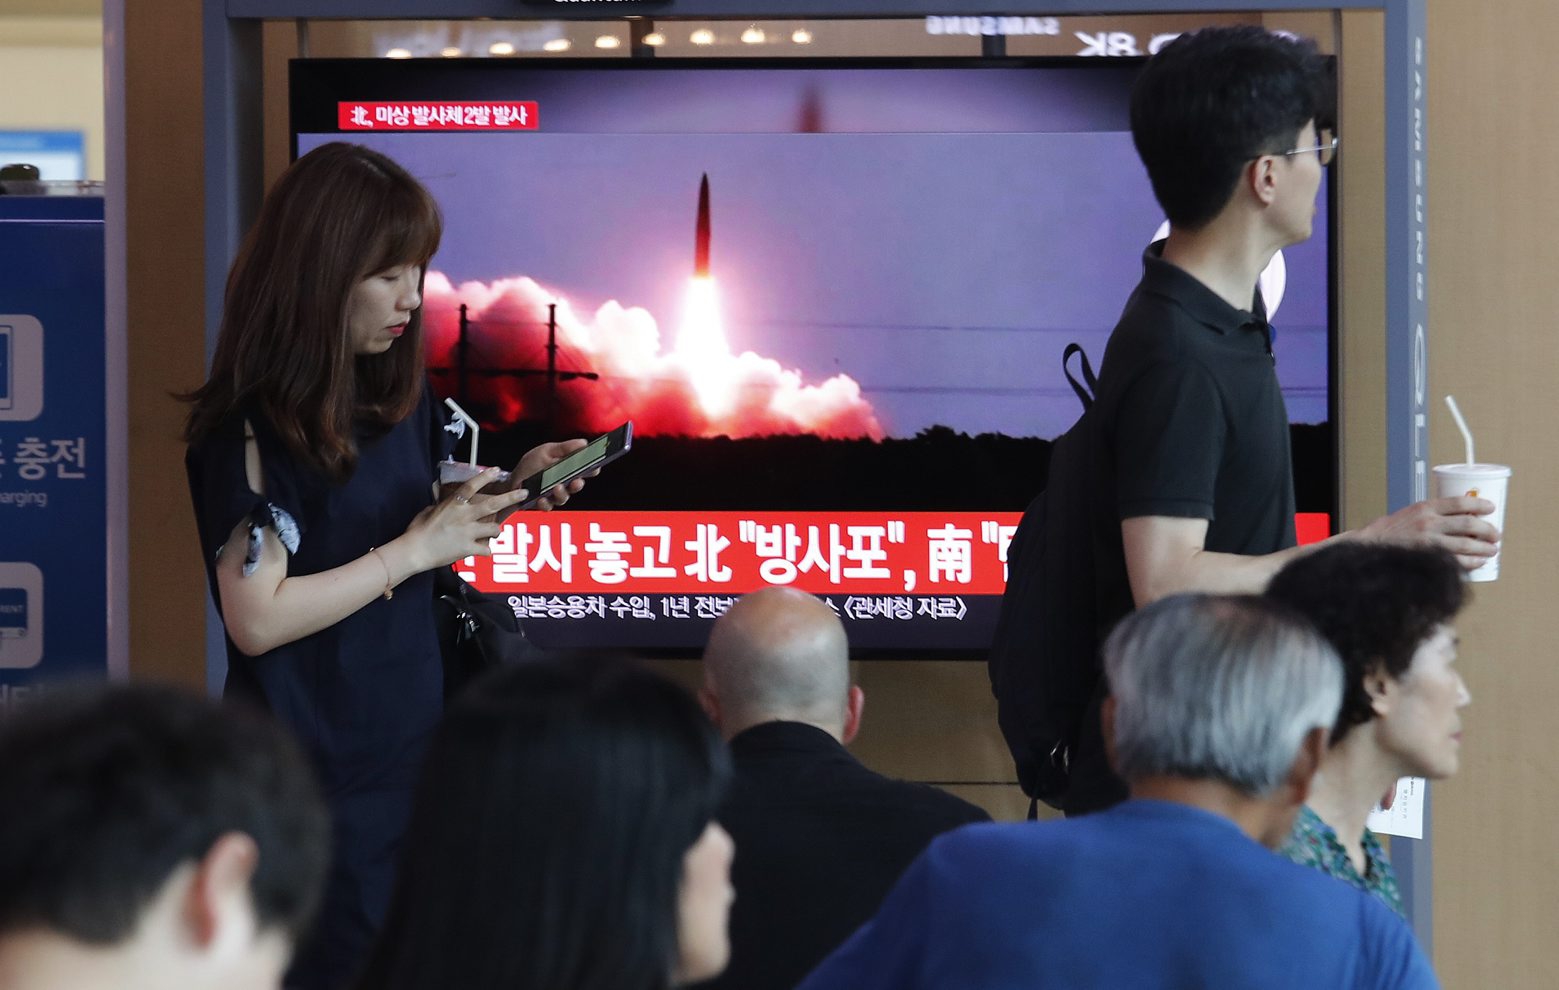 People watch a TV showing a file image of North Korea's missile launch during a news program at the Seoul Railway Station in Seoul, South Korea, Tuesday, Aug. 6, 2019. North Korea on Tuesday continued to ramp up its weapons demonstrations by firing unidentified projectiles twice into the sea while lashing out at the United States and South Korea for continuing their joint military exercises that the North says could derail fragile nuclear diplomacy. The sign reads "North Korea's multiple rocket launchers system." (AP Photo/Ahn Young-joon) South Korea North Korea Projectiles